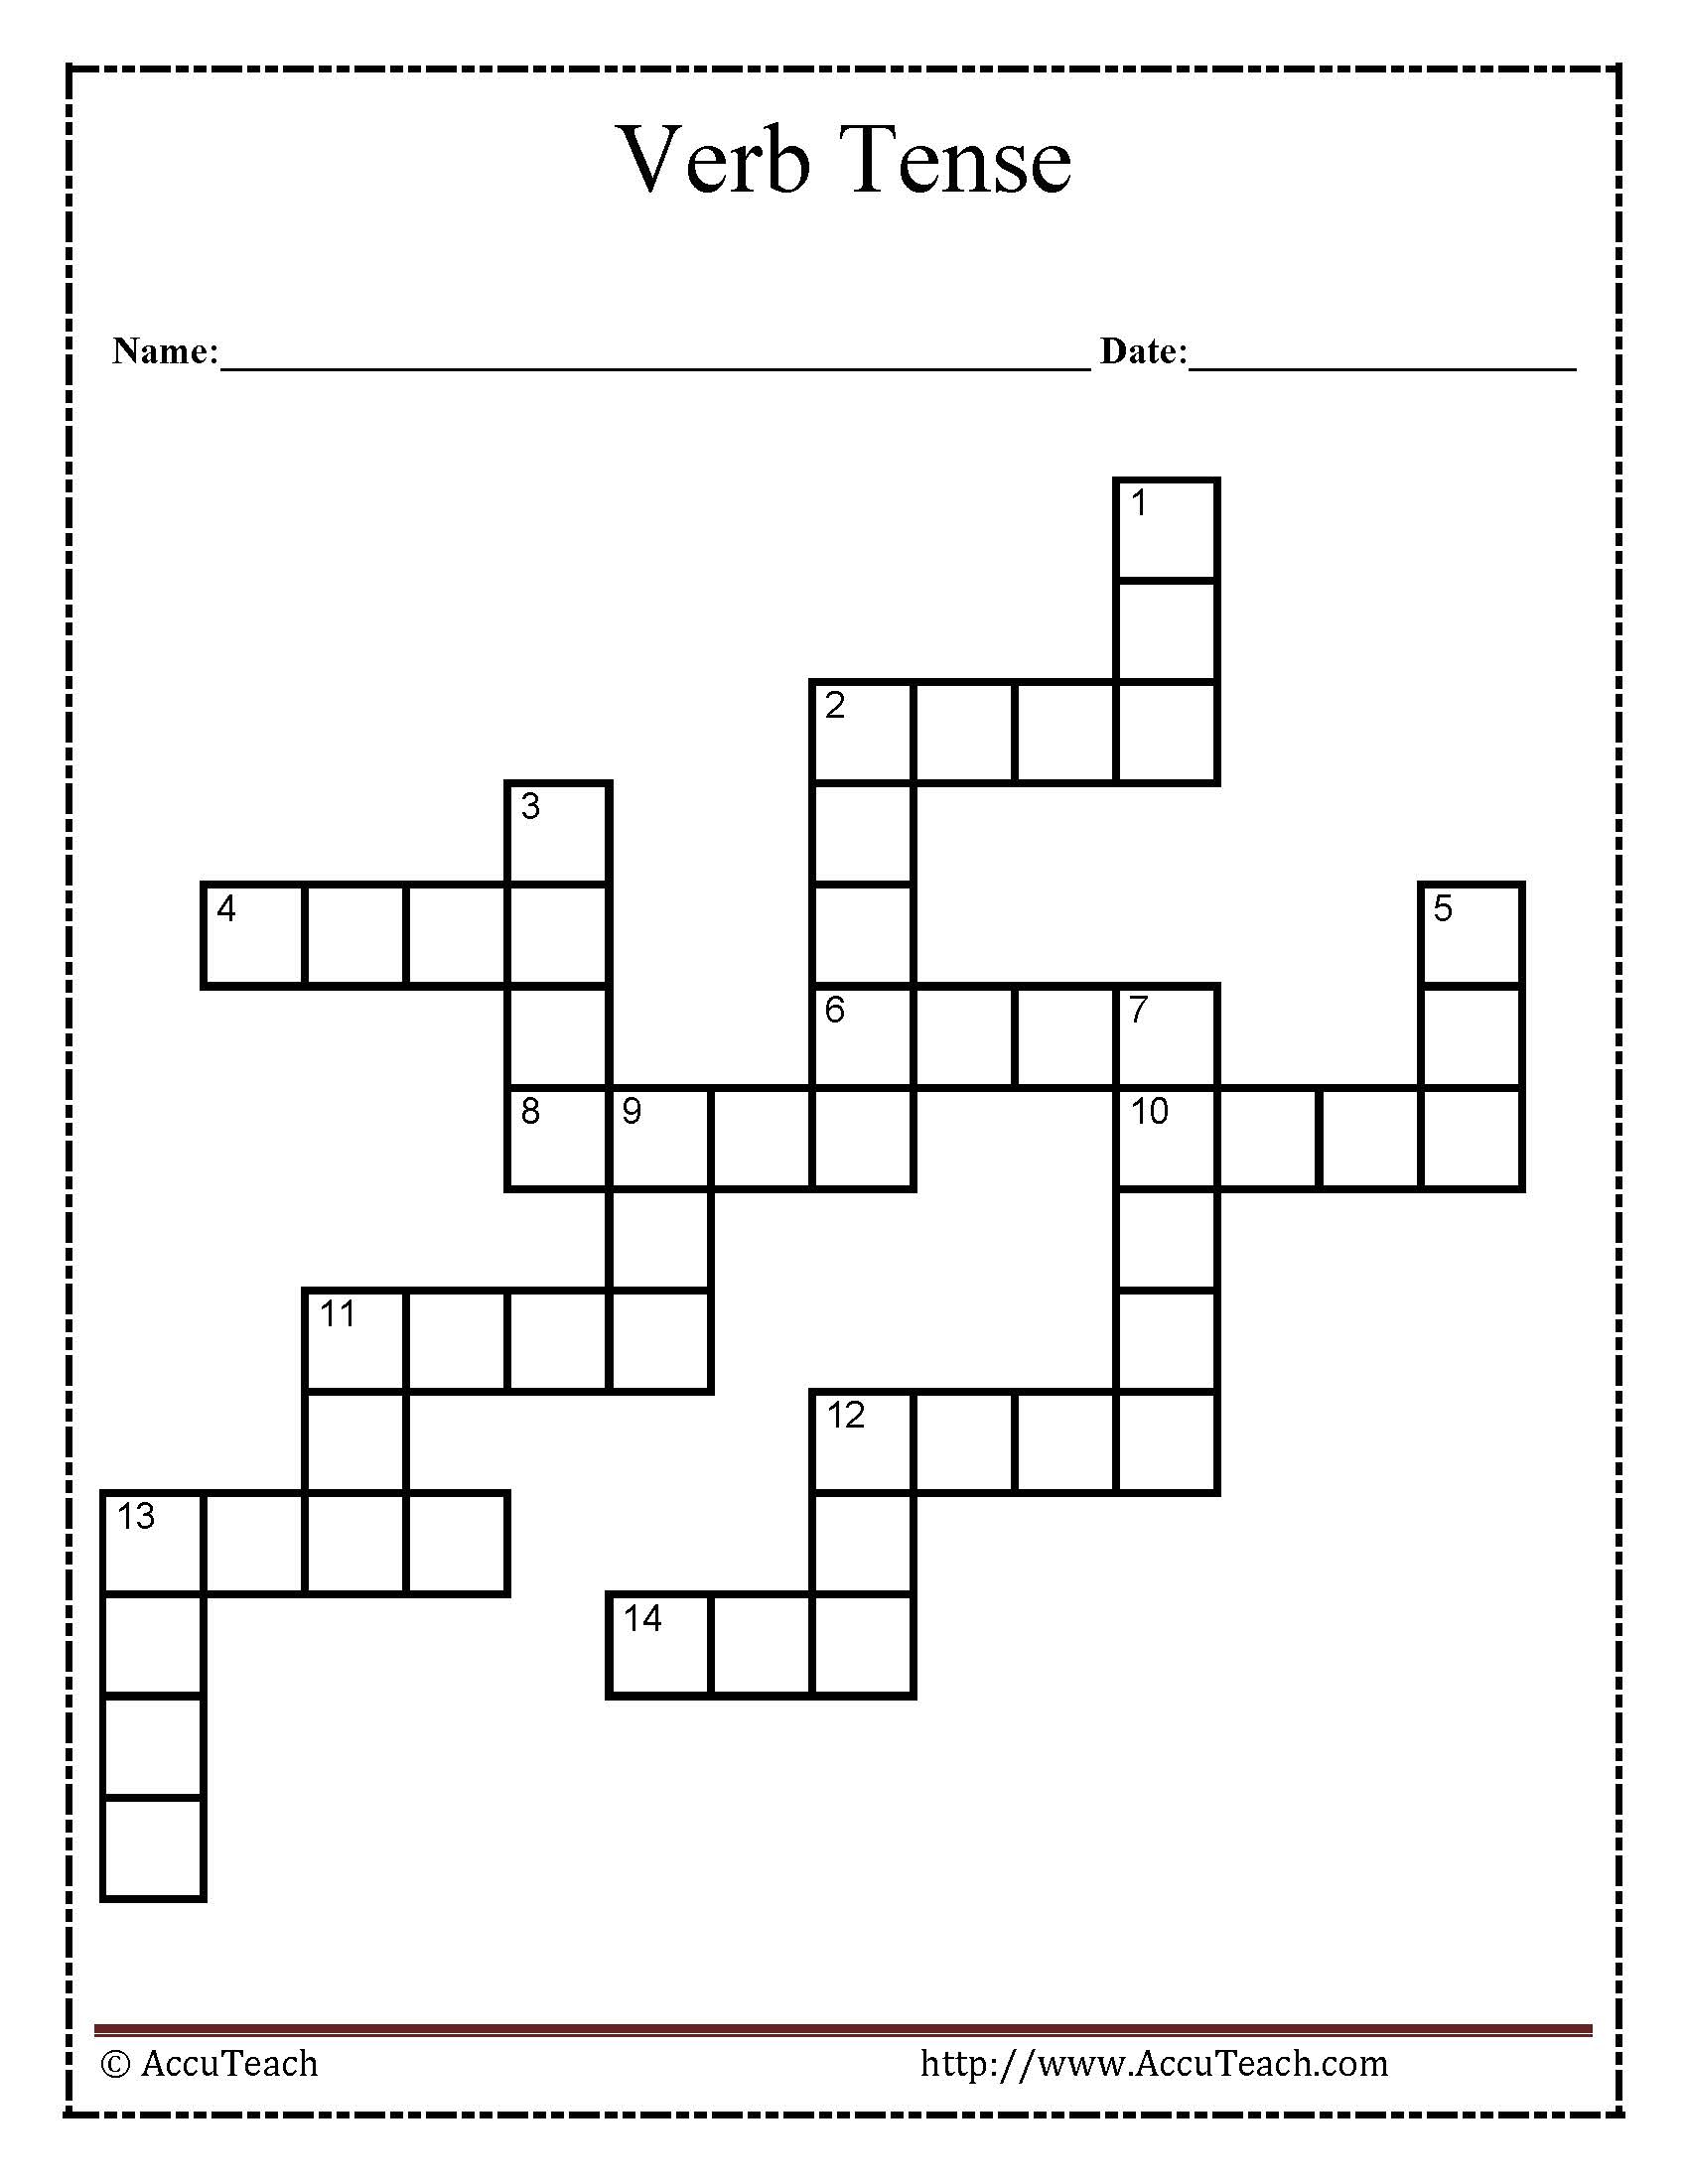 Verb Tense Crossword Puzzle Worksheet - Printable English Crossword Puzzles With Answers Pdf